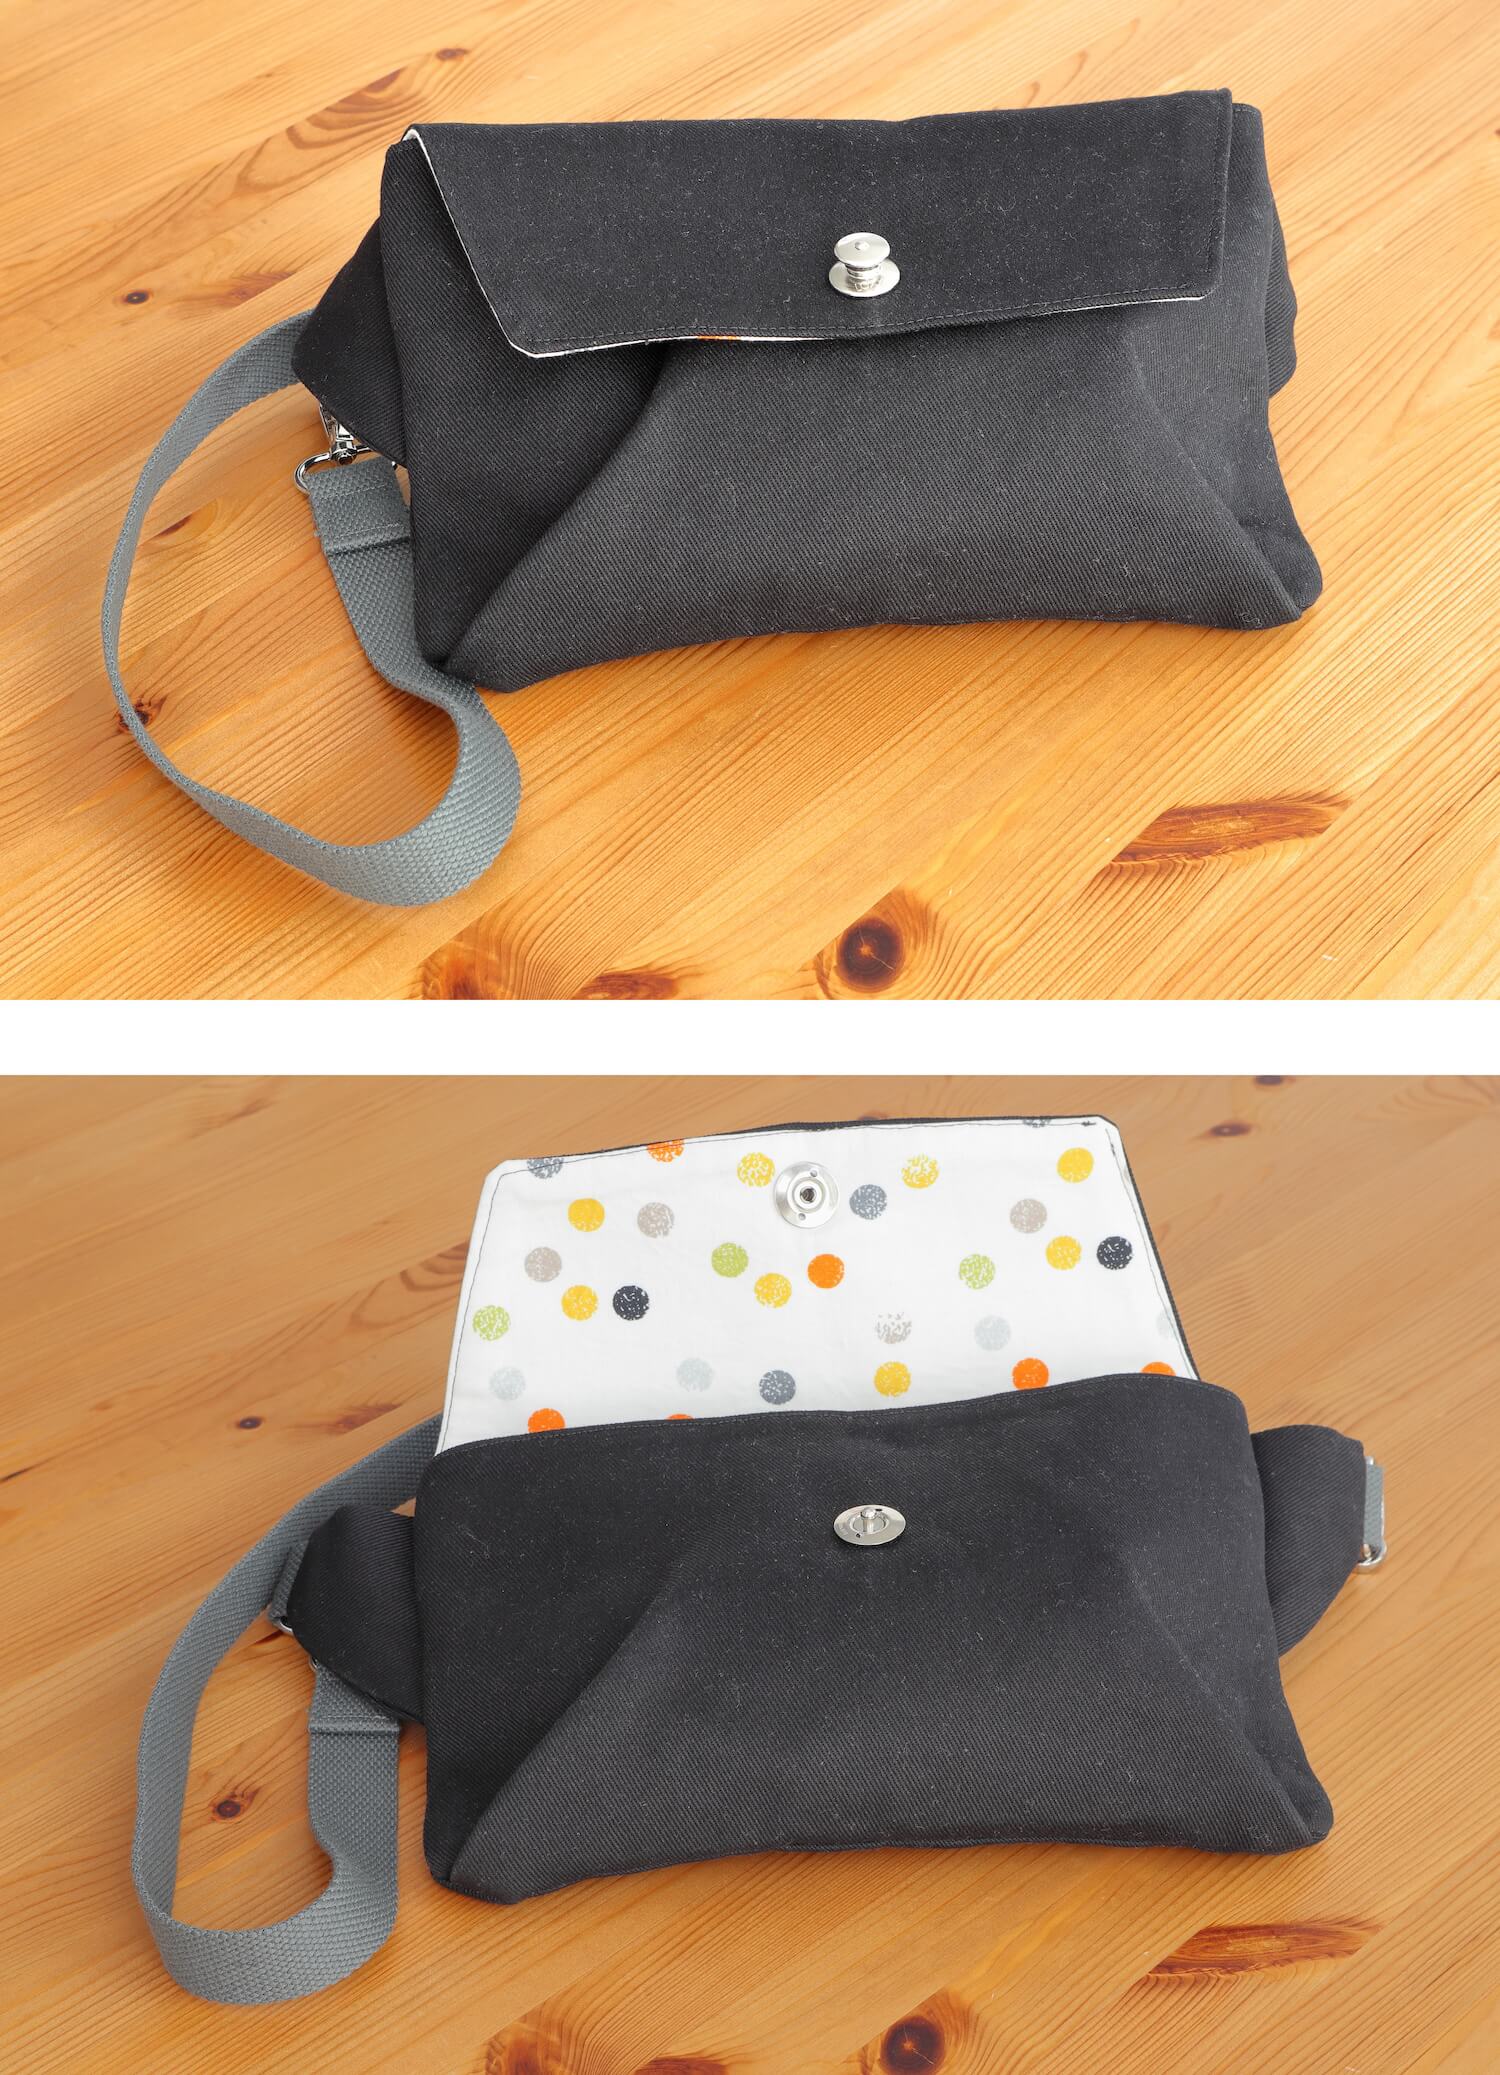 Top of the photo is a smaller bag with a silver clasp, gray strap, and it's black with a flap folded and clasped on the front, it's the size of a fanny pack or small purse. Bottom of the photo is the same bag with the flap opened up and the lining fabric has random dots of orange, gray, black, lime green, and yellow.